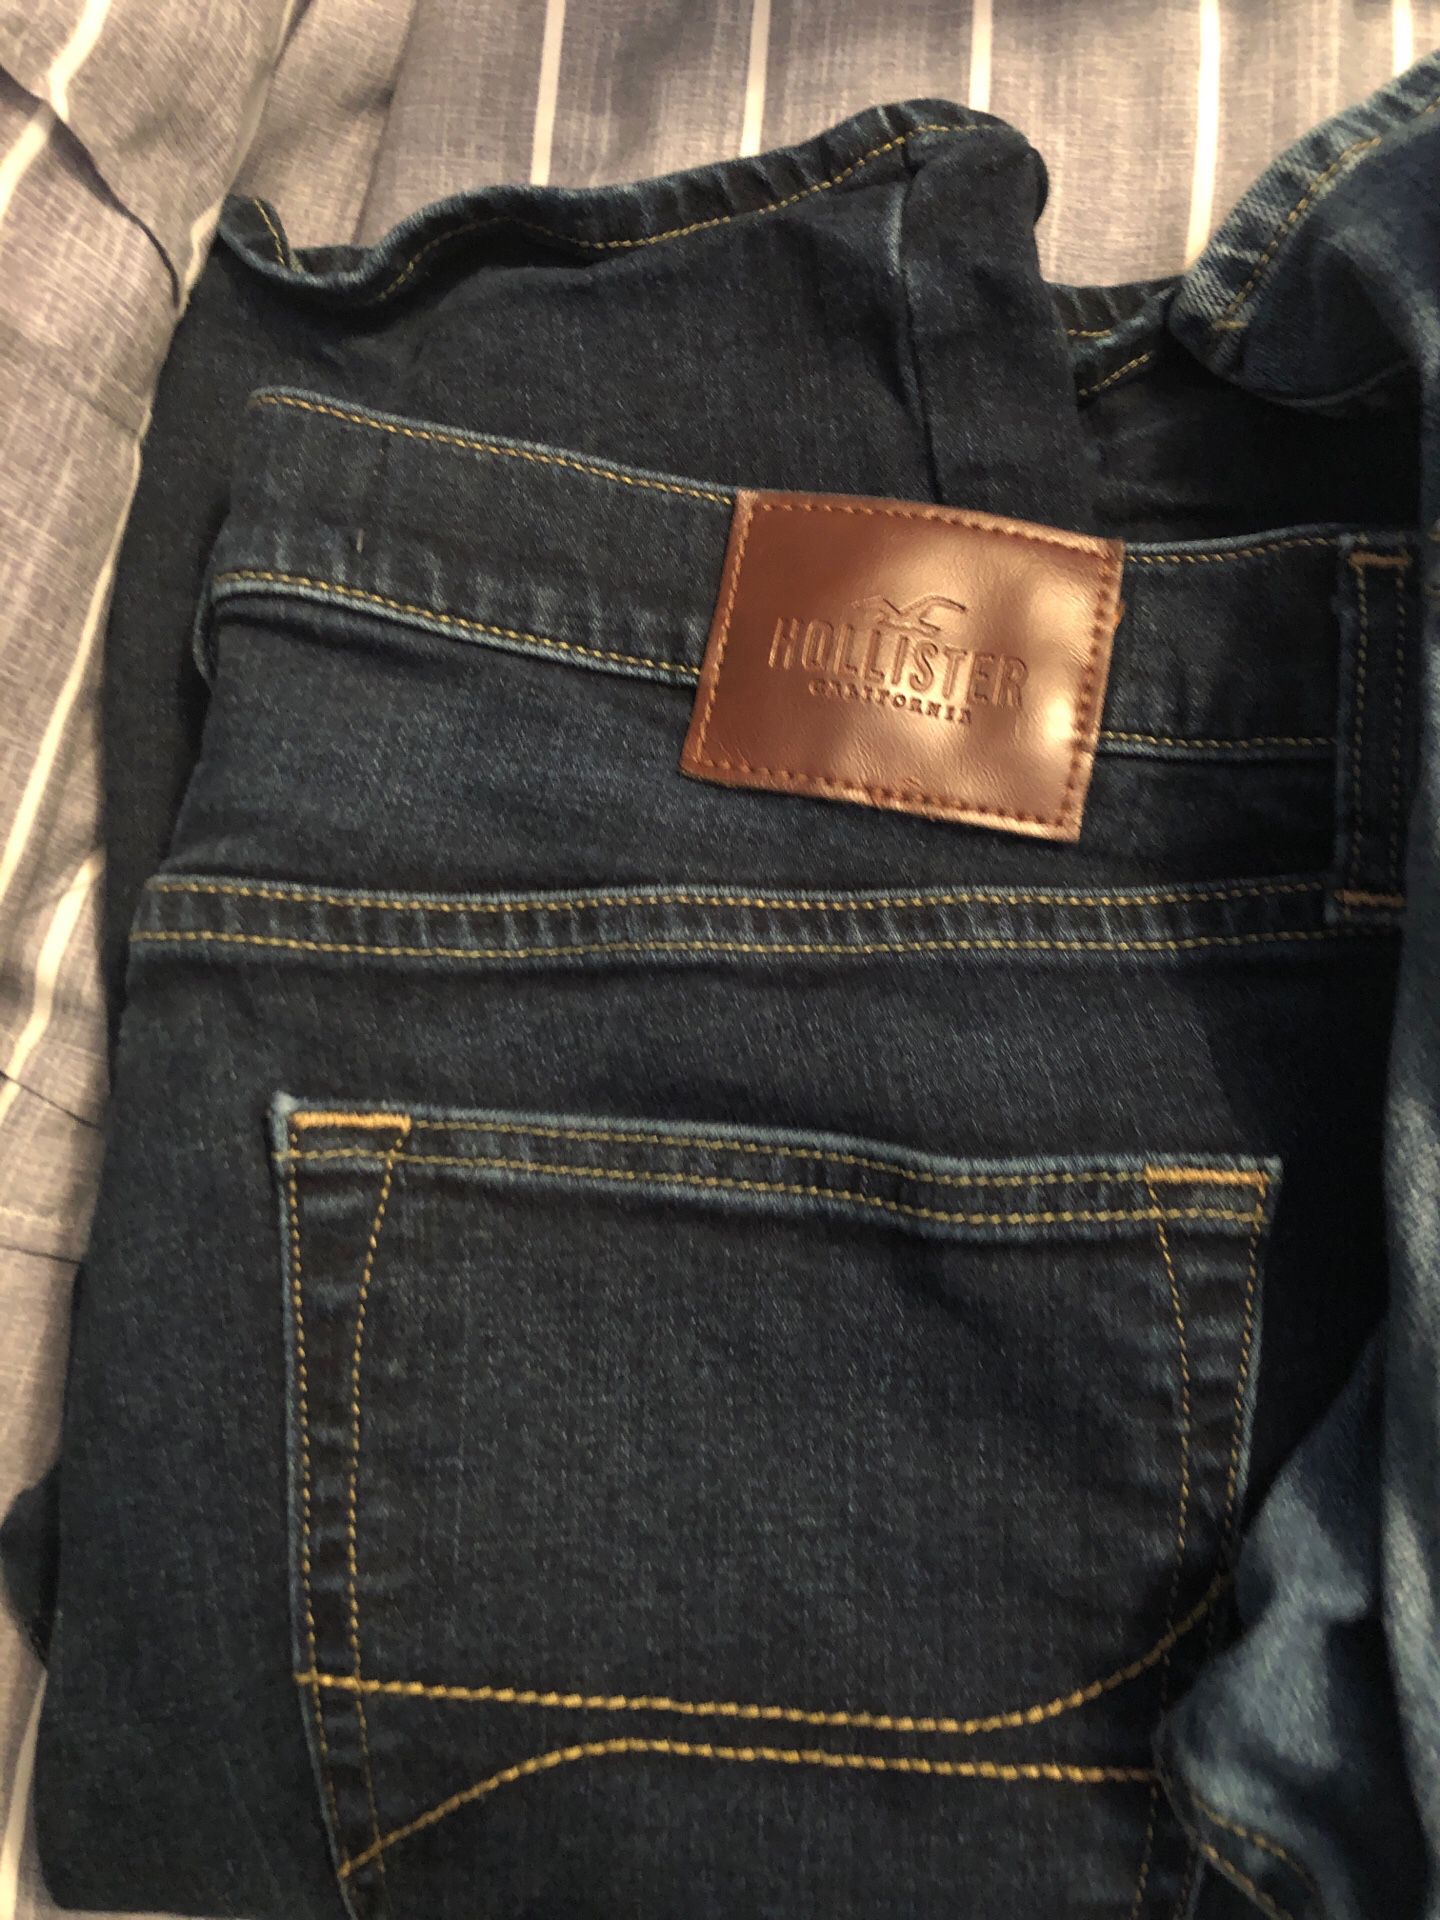 Men’s Holister jeans and Goodfellow